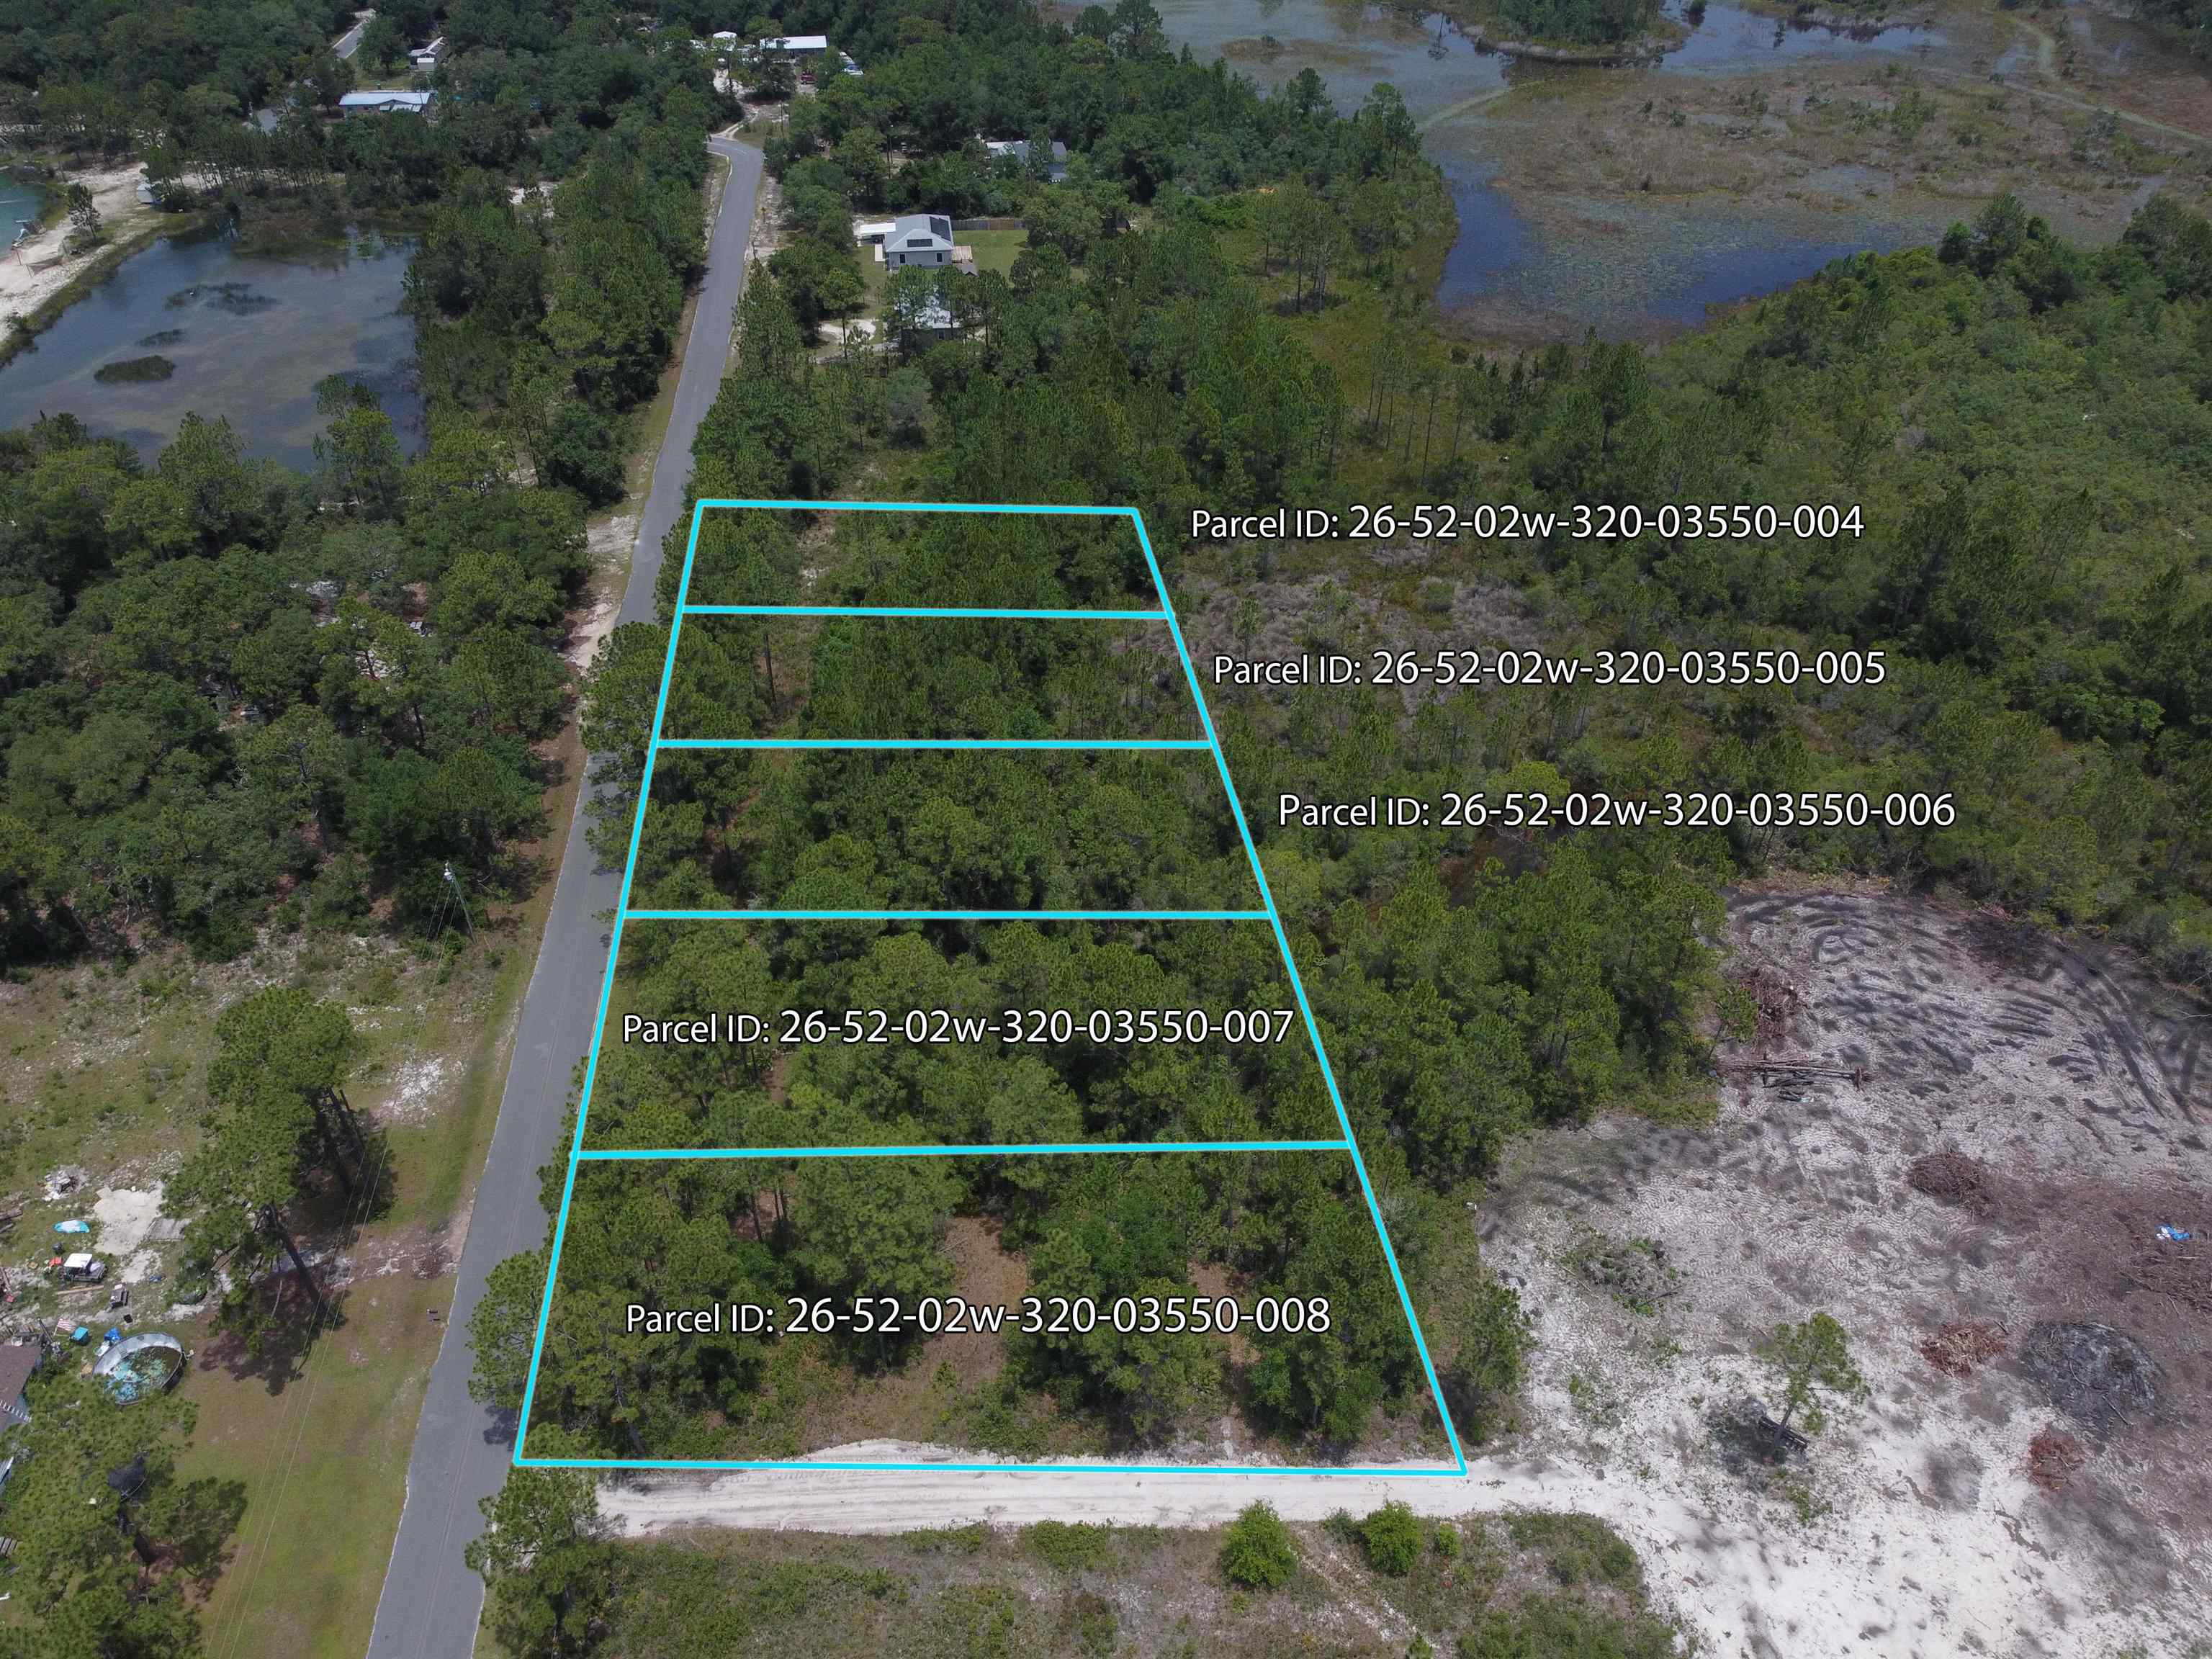 XX Tower,PANACEA,Florida 32346,Lots and land,Tower,359449